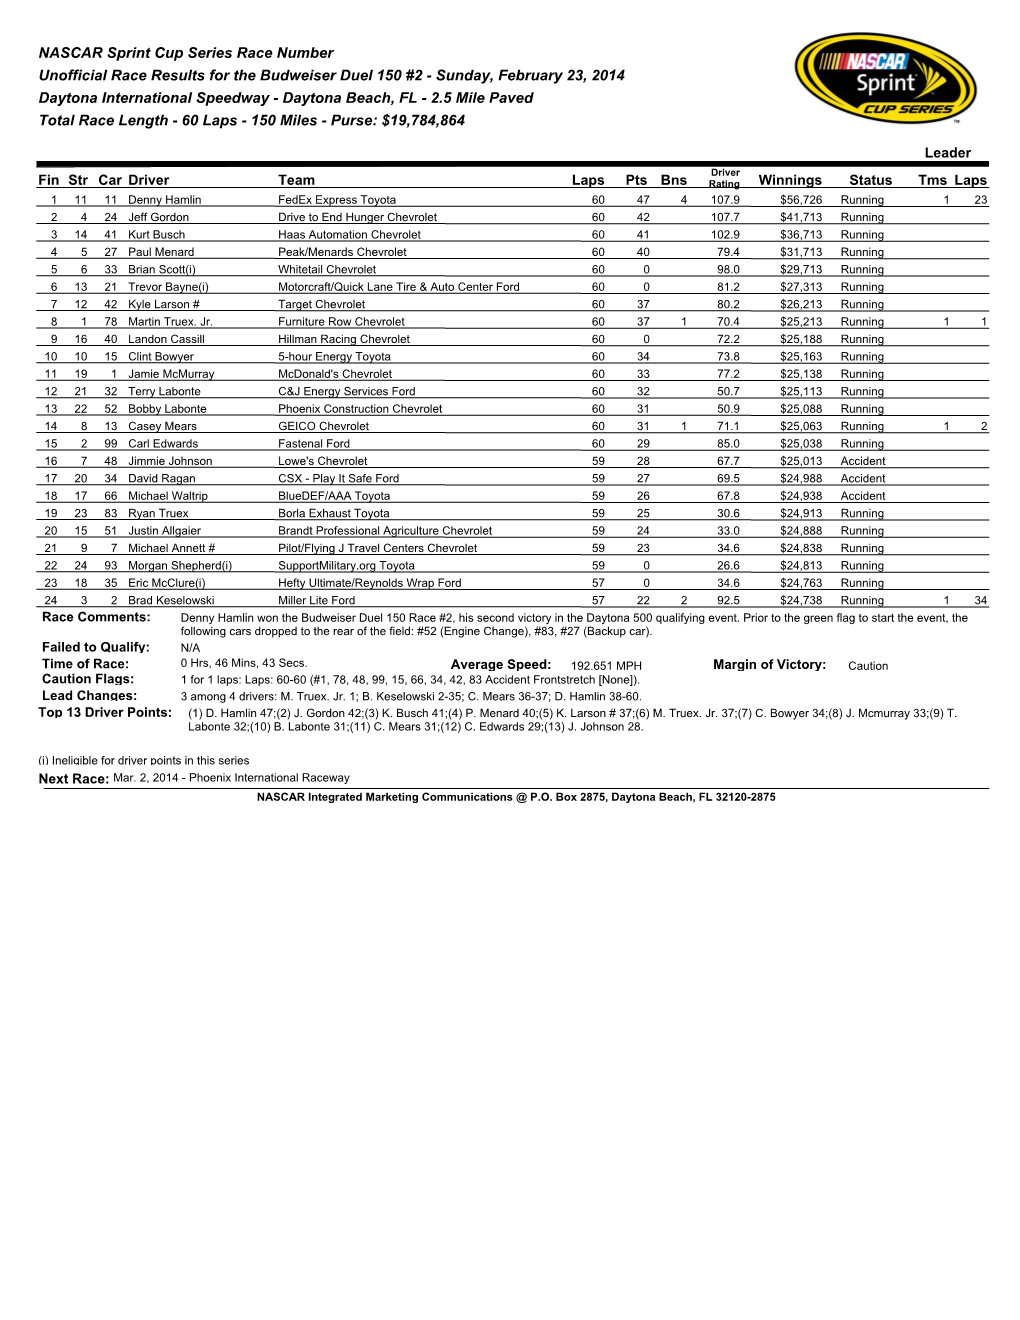 NASCAR Sprint Cup Series Race Number Unofficial Race Results